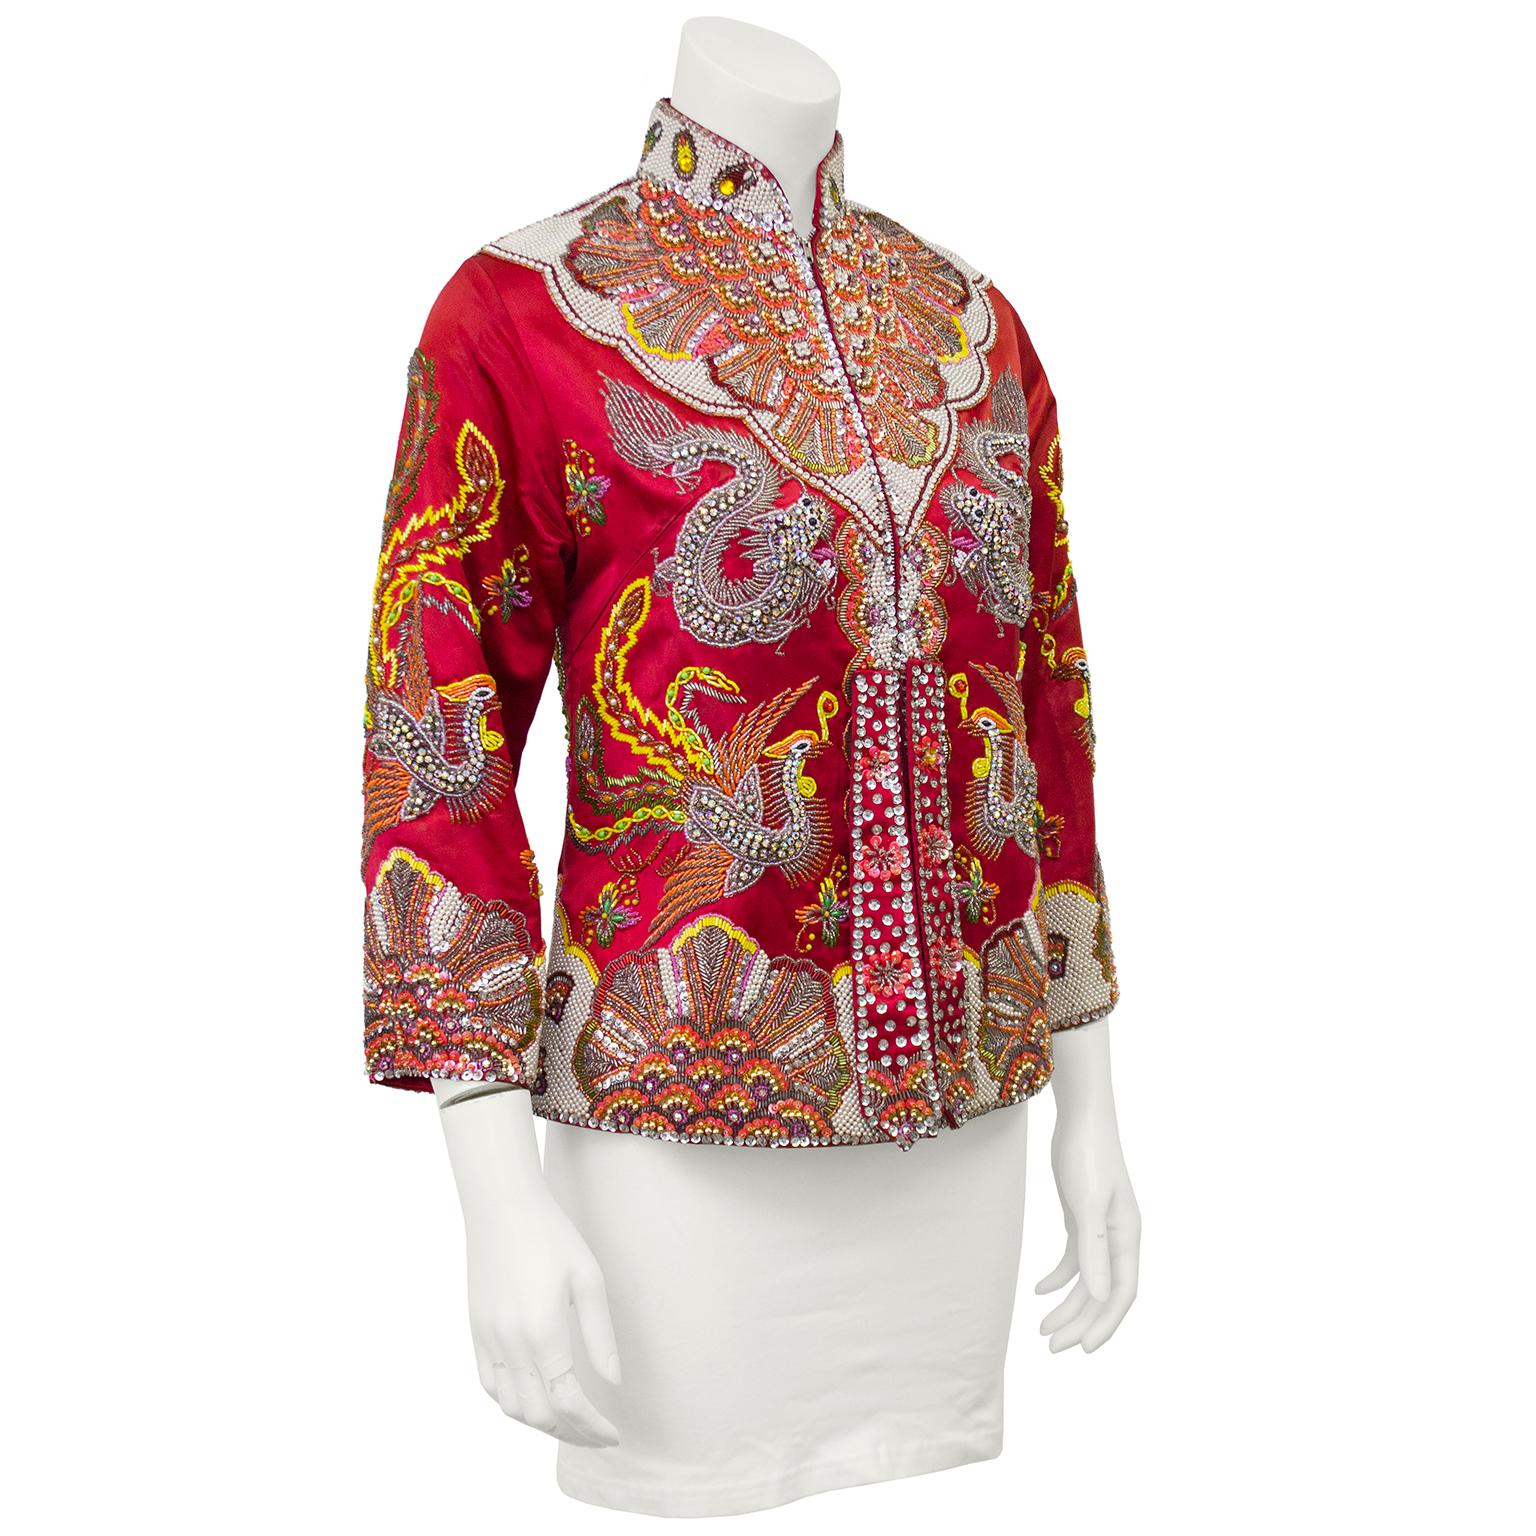 Over the top 1960's red satin hand beaded Mandarin collar evening jacket with two hanging tabs. Encrusted with sequins, rhinestones, pearls and hand embroidery this jacket is befitting an Empress! Metal zipper up the front, flaming dragons